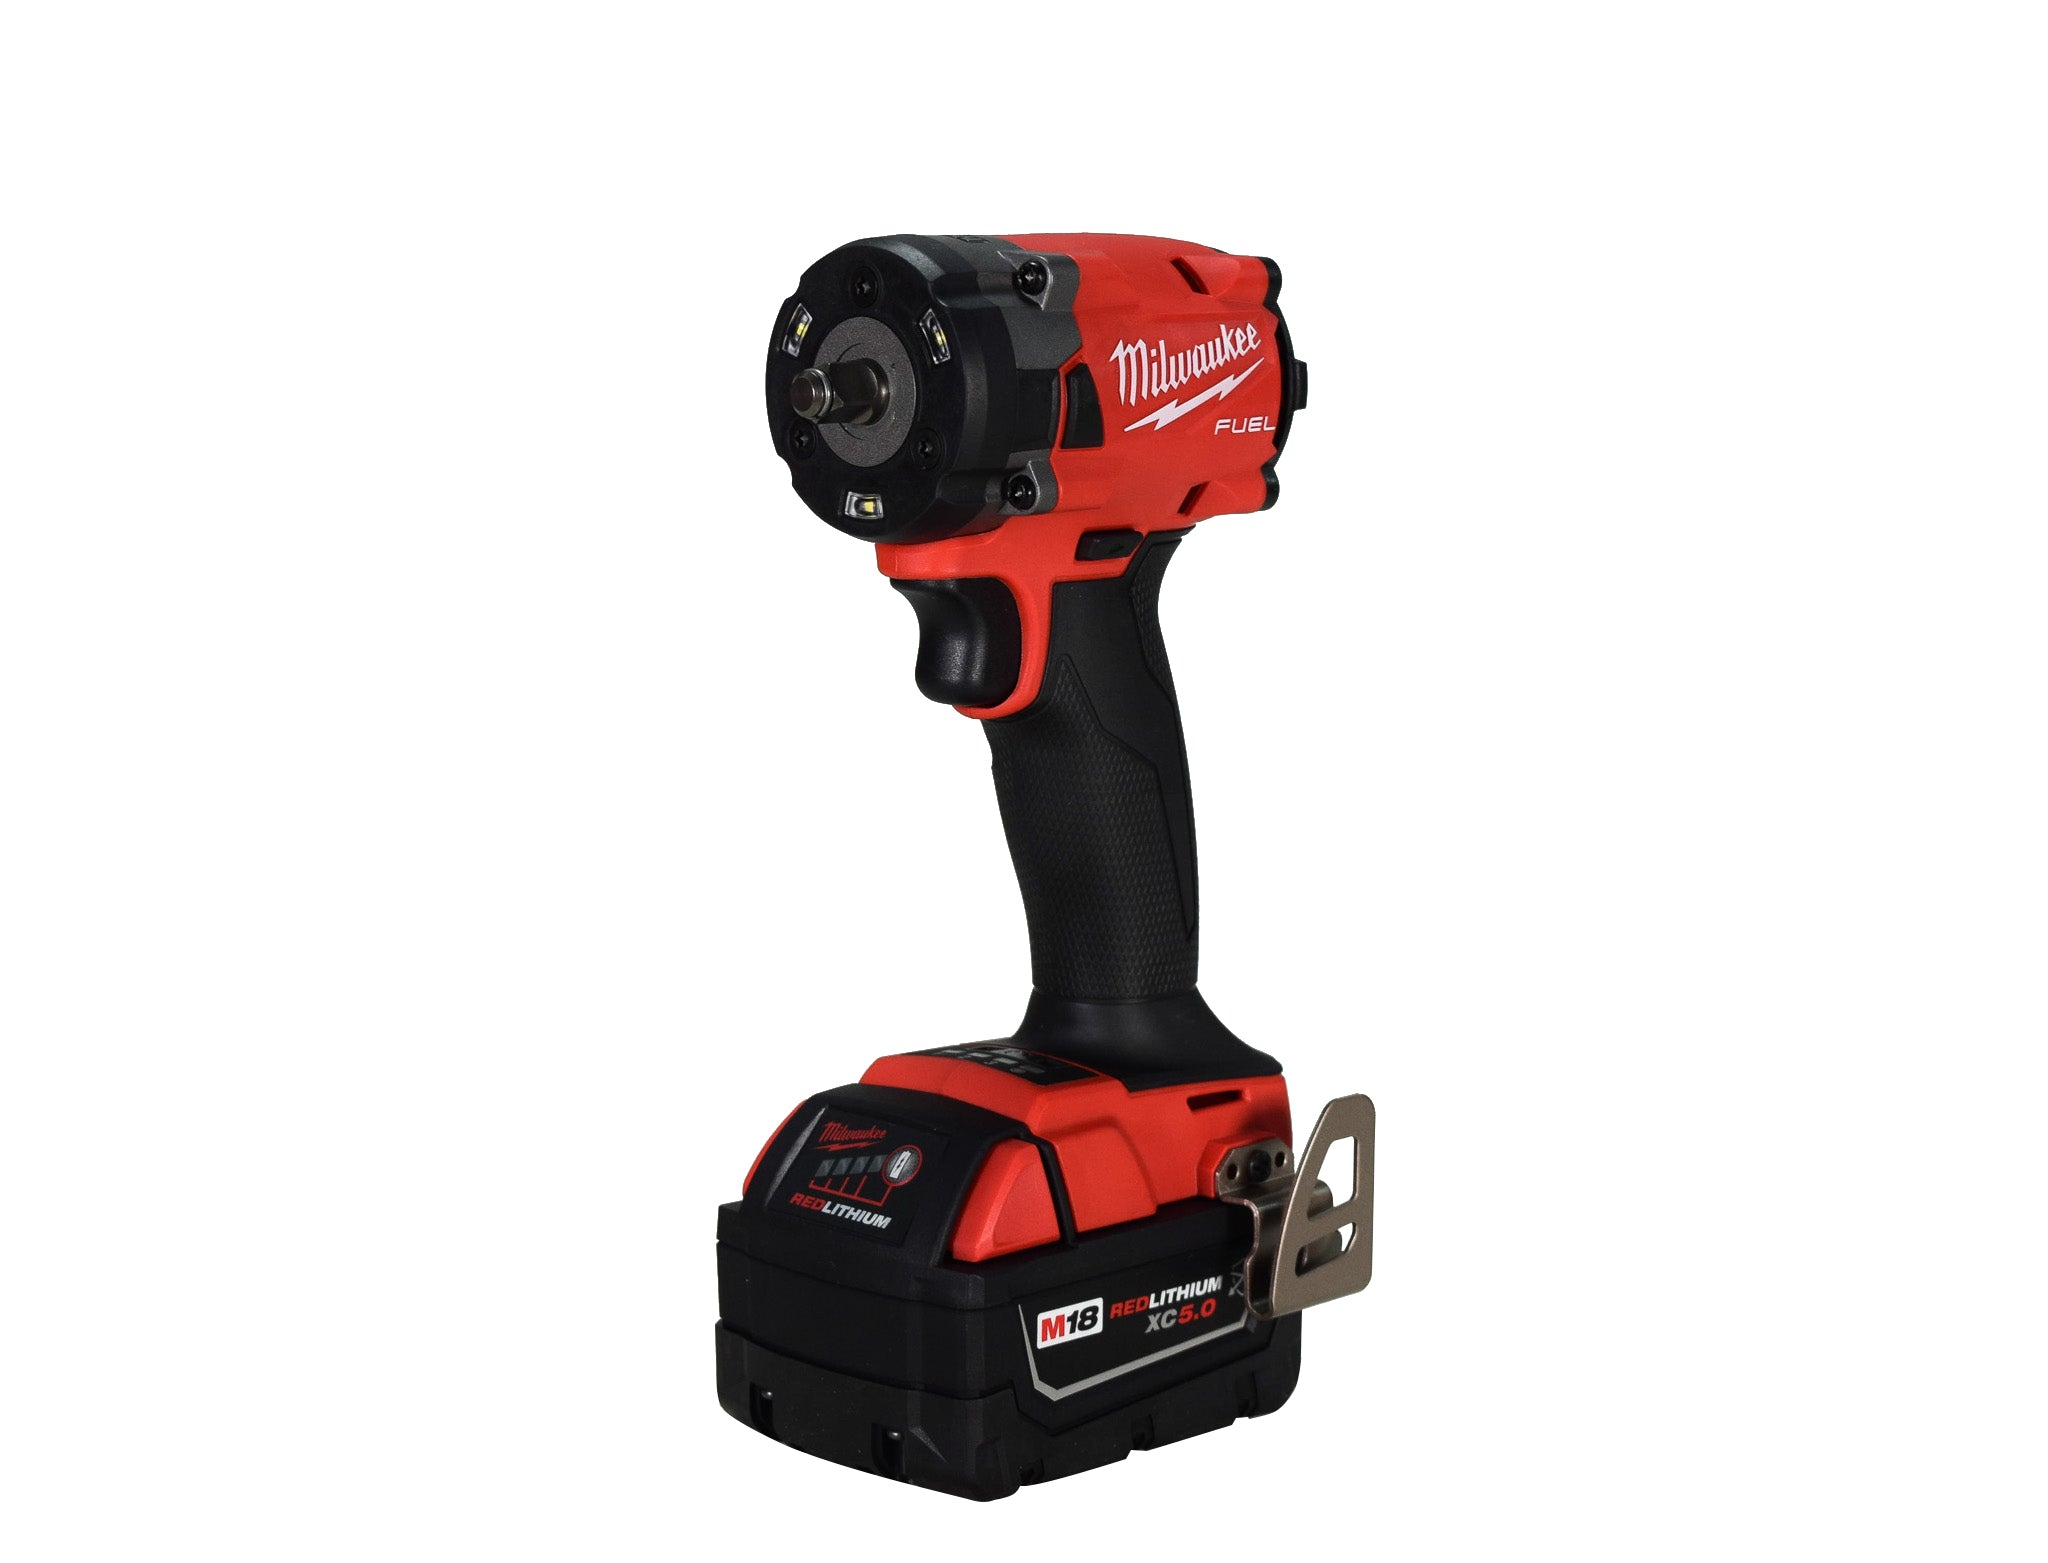 Milwauke 2854-22R M18 FUEL 18V Lithium-Ion Brushless Cordless 3/8 in. Compact Impact Wrench with Friction Ring Kit, Resistant Batteries